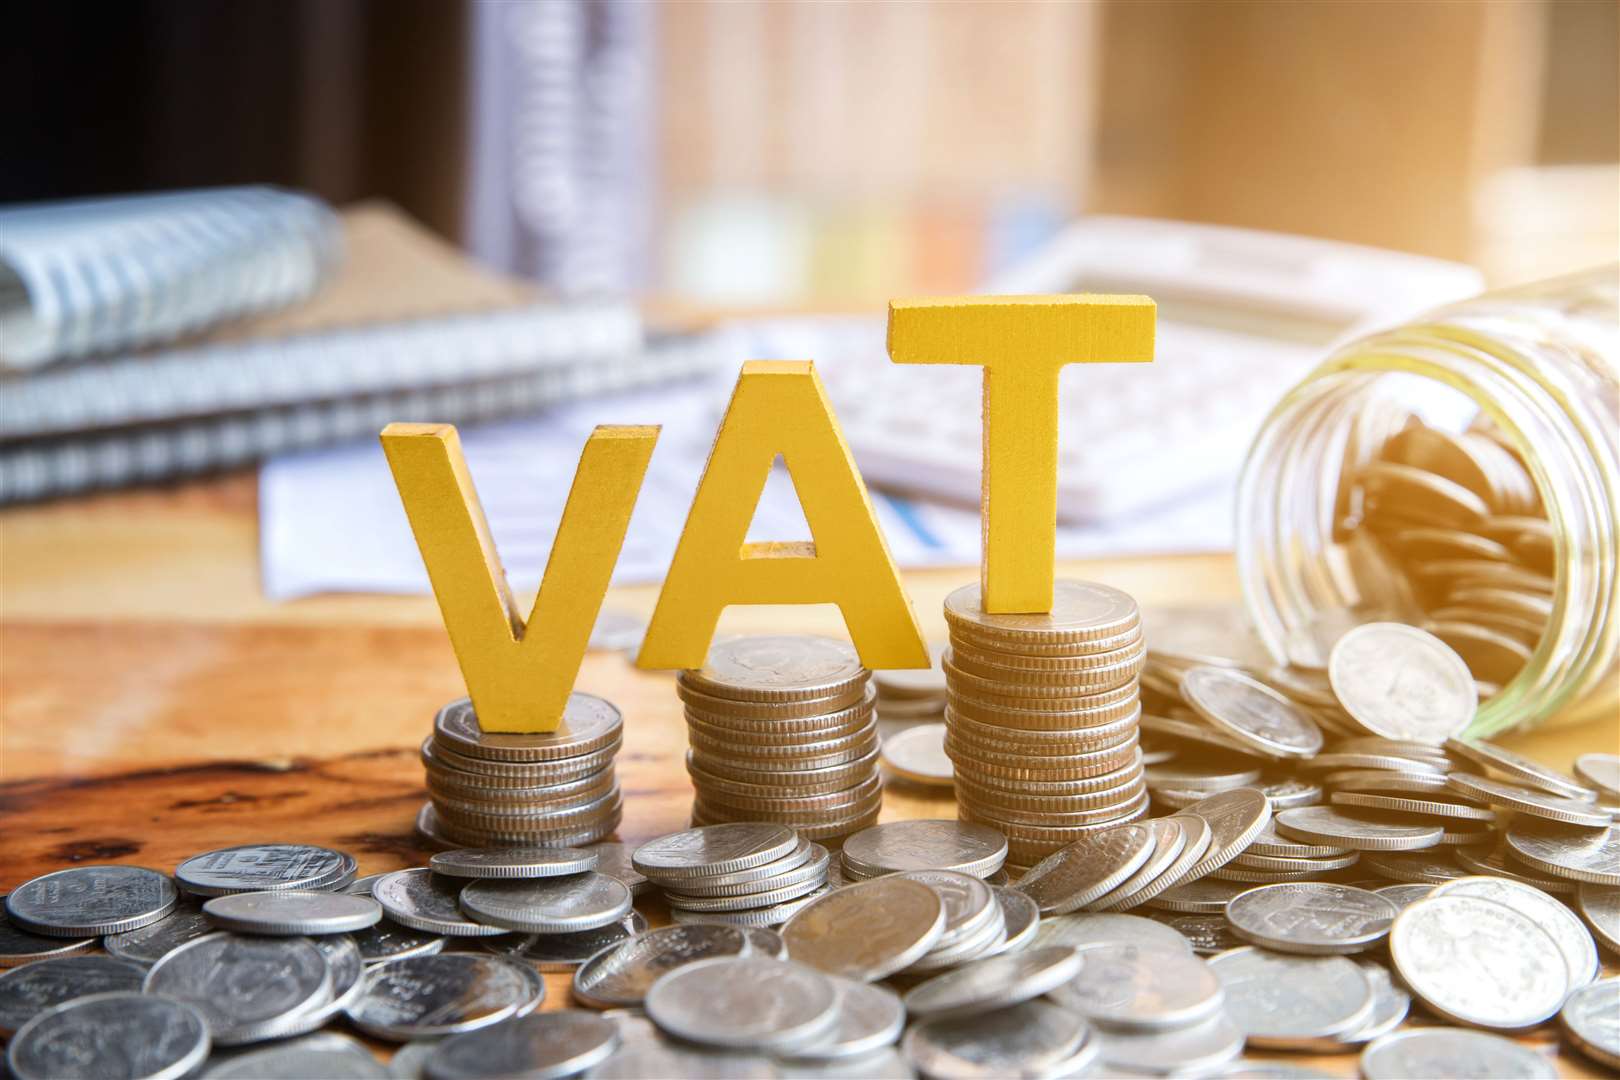 Gordon MP Richard Thomson has given his backing to calls for a reduction in the rate of VAT for the hospitality sector.